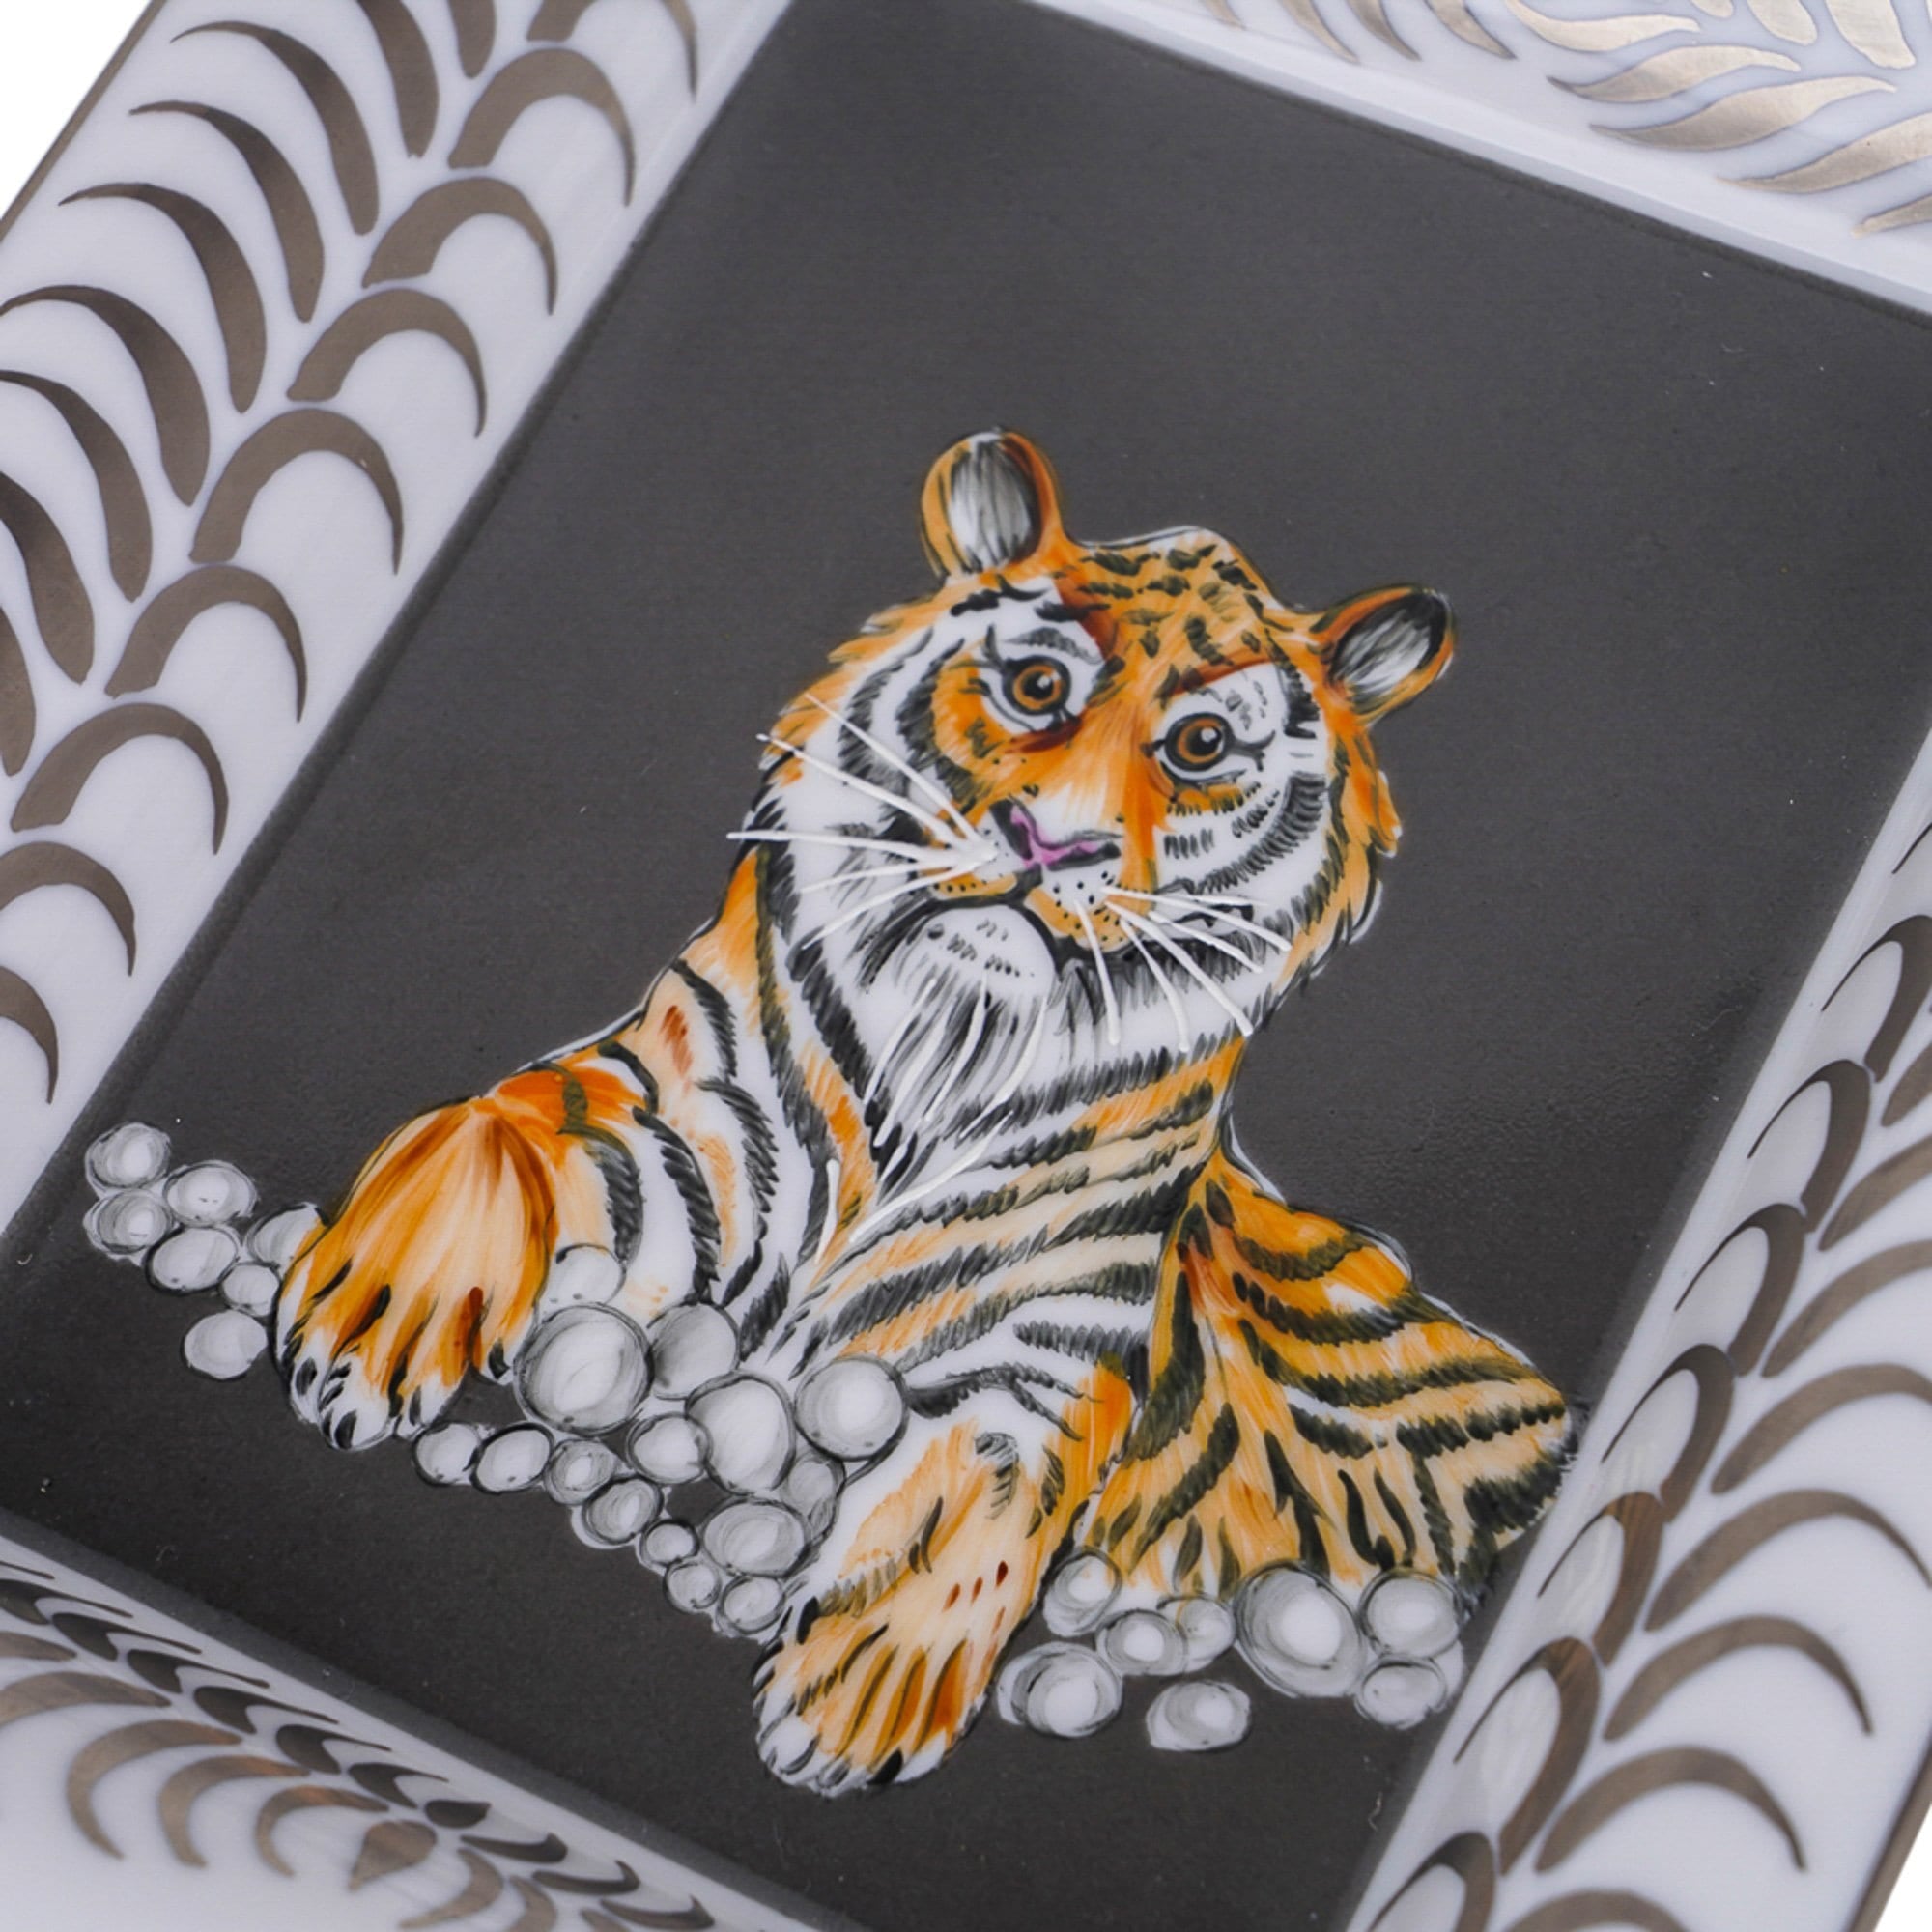 Hermes Change Tray Tigre Royal Platine/Gris Hand Painted New w/ Box